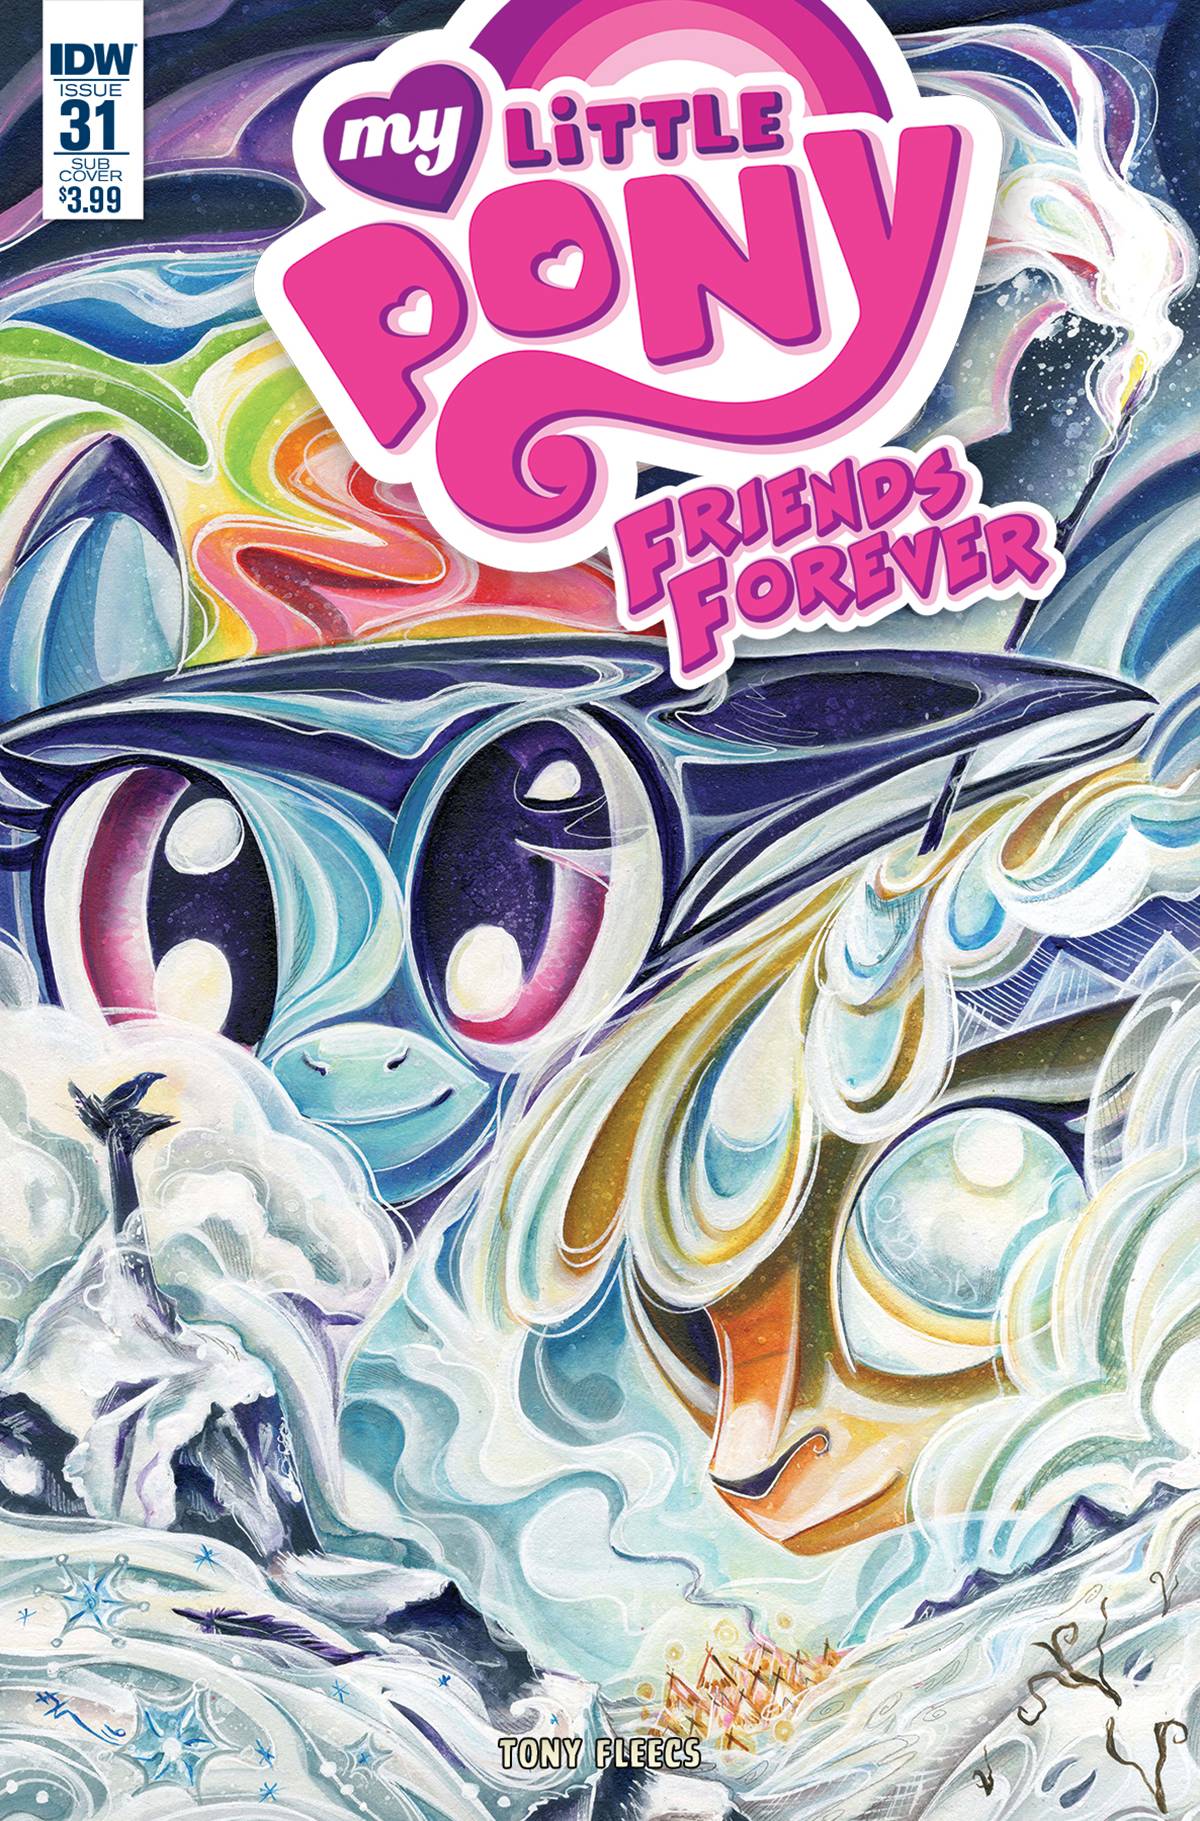 My Little Pony Friends Forever #31 Subscription Variant